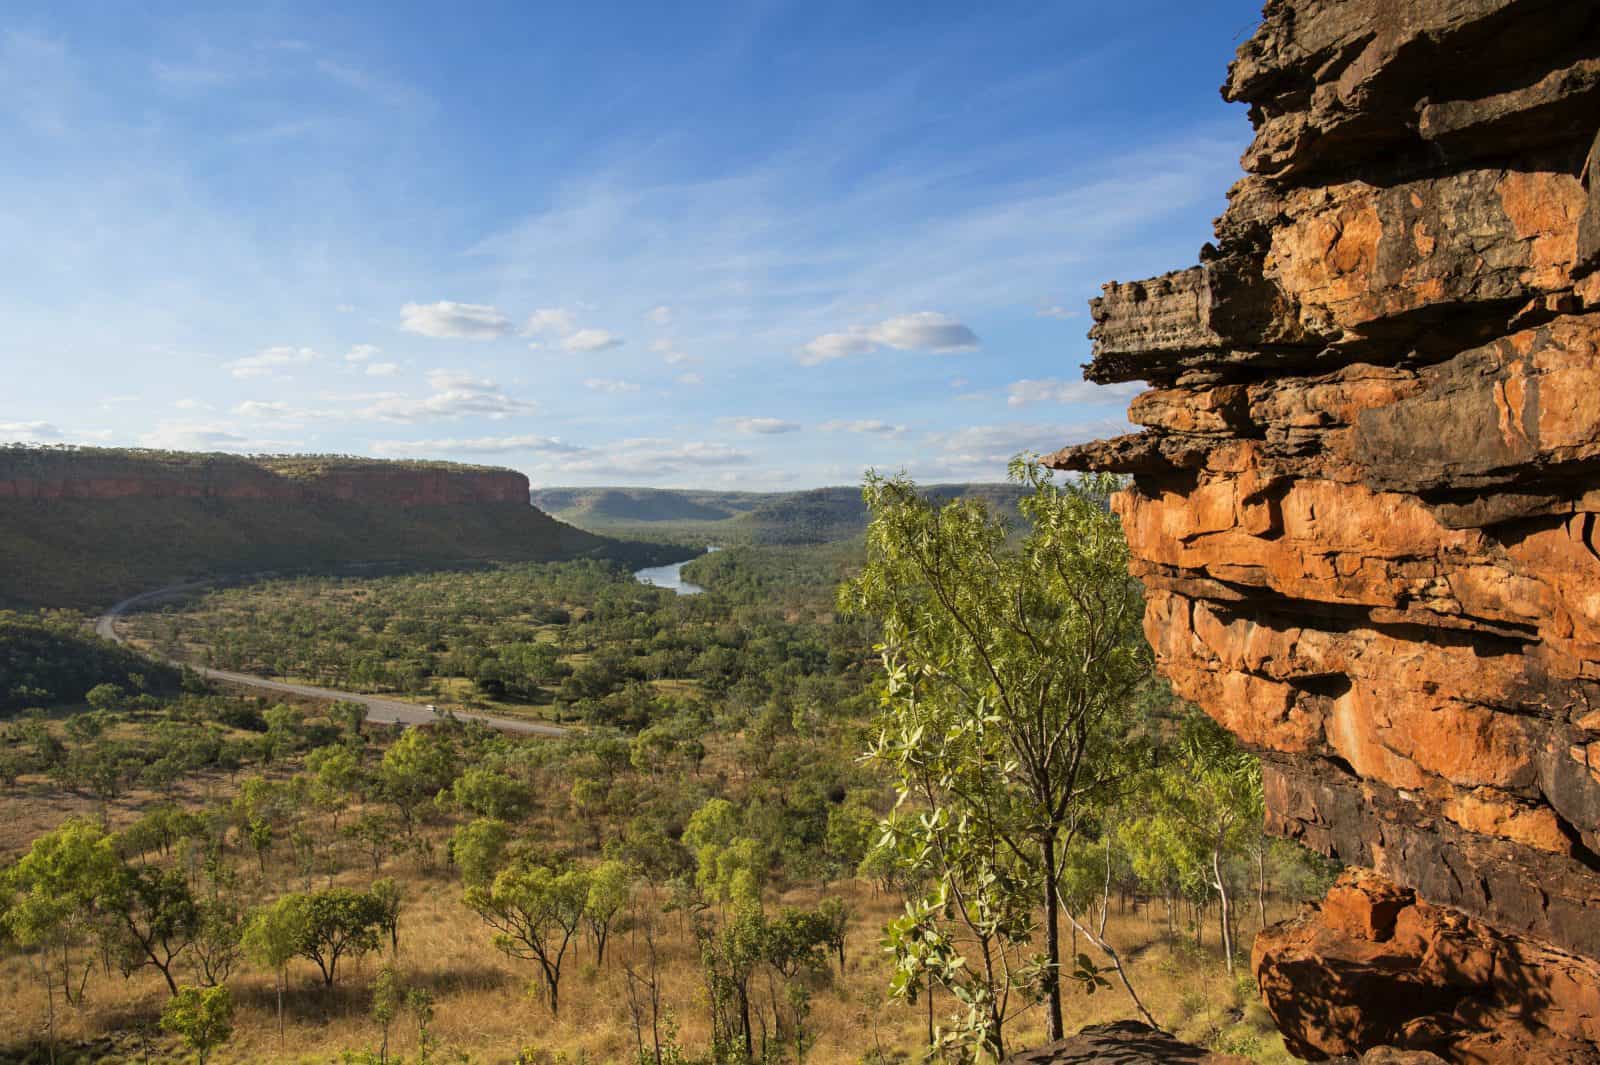 View over Gregory National Park